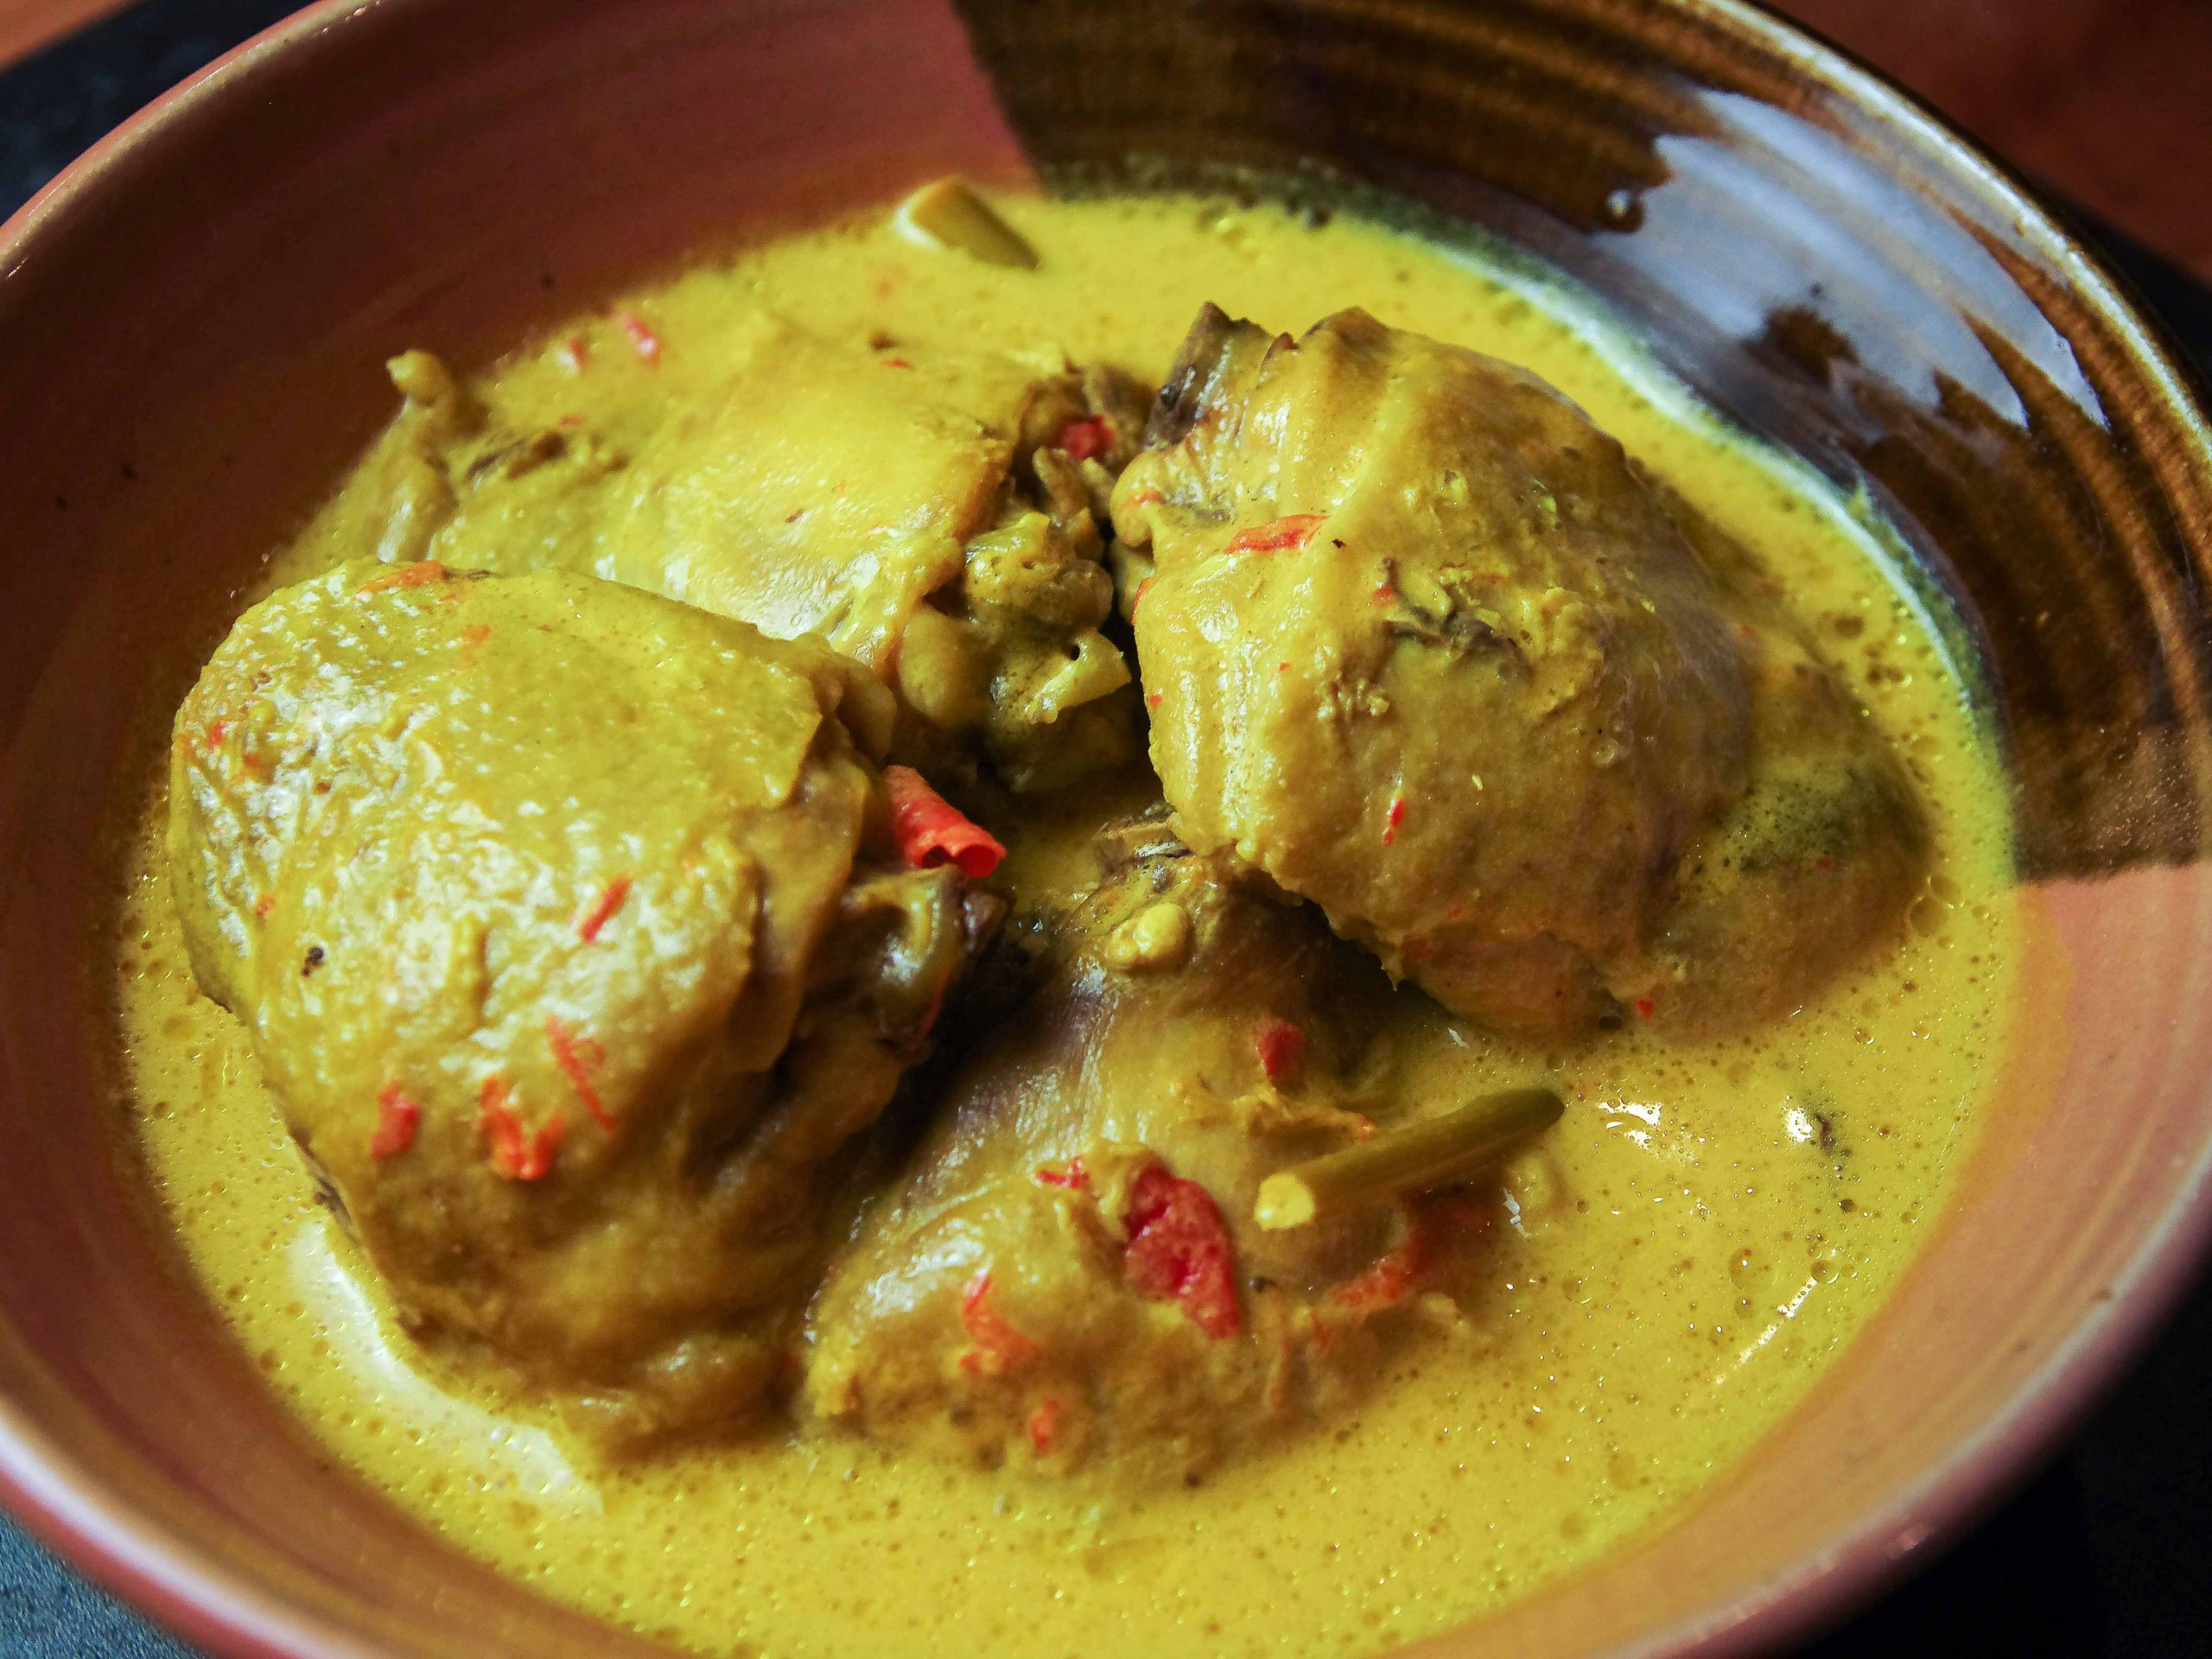 Chicken pieces sit in a yellow gravy, all nestled in a pink-brown bowl on a steel-grey surface.